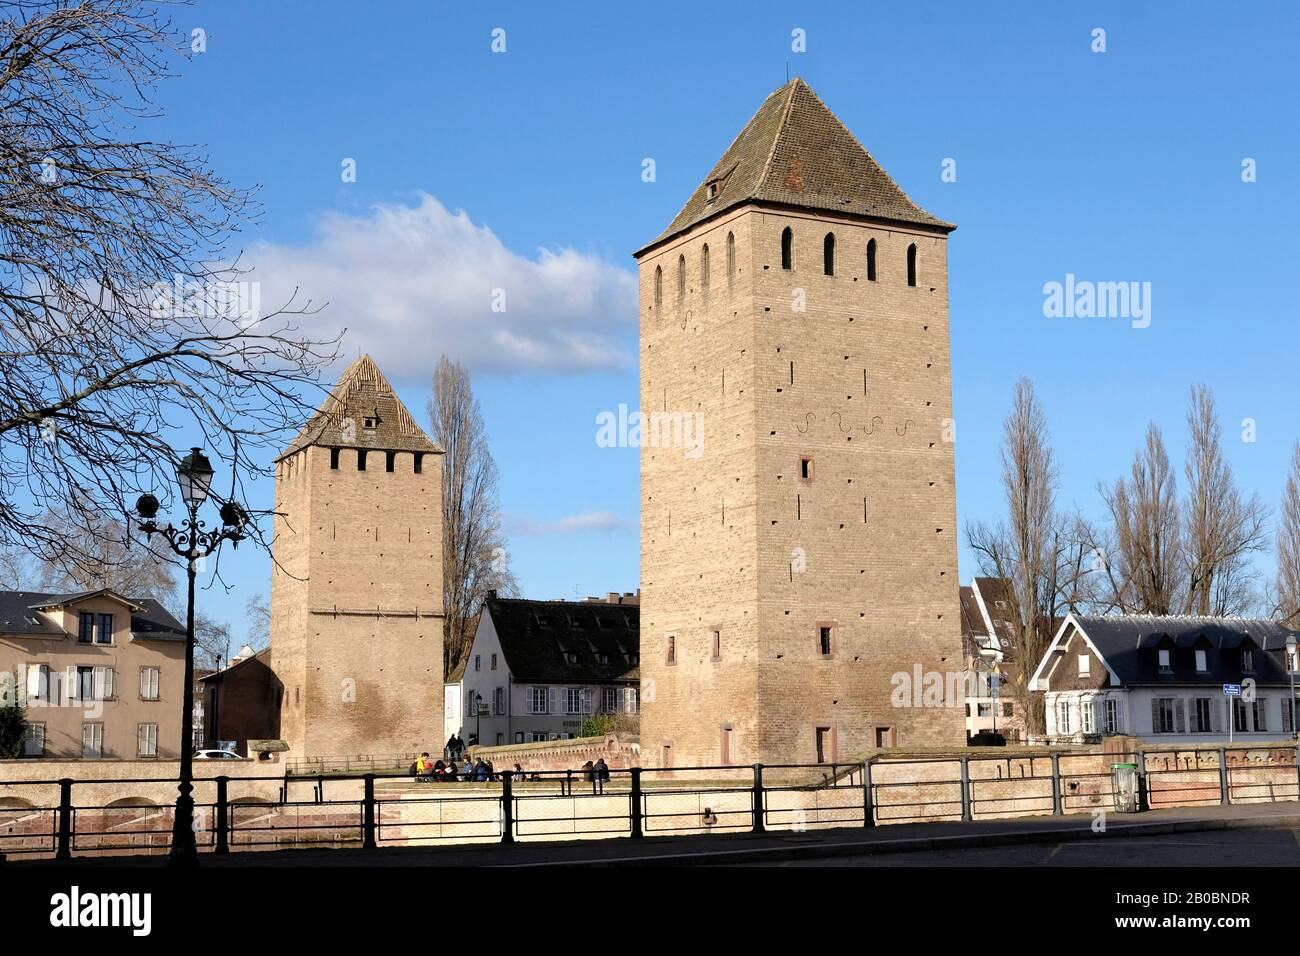 A view of one the guard towers in Strasbourg, France Stock Photo